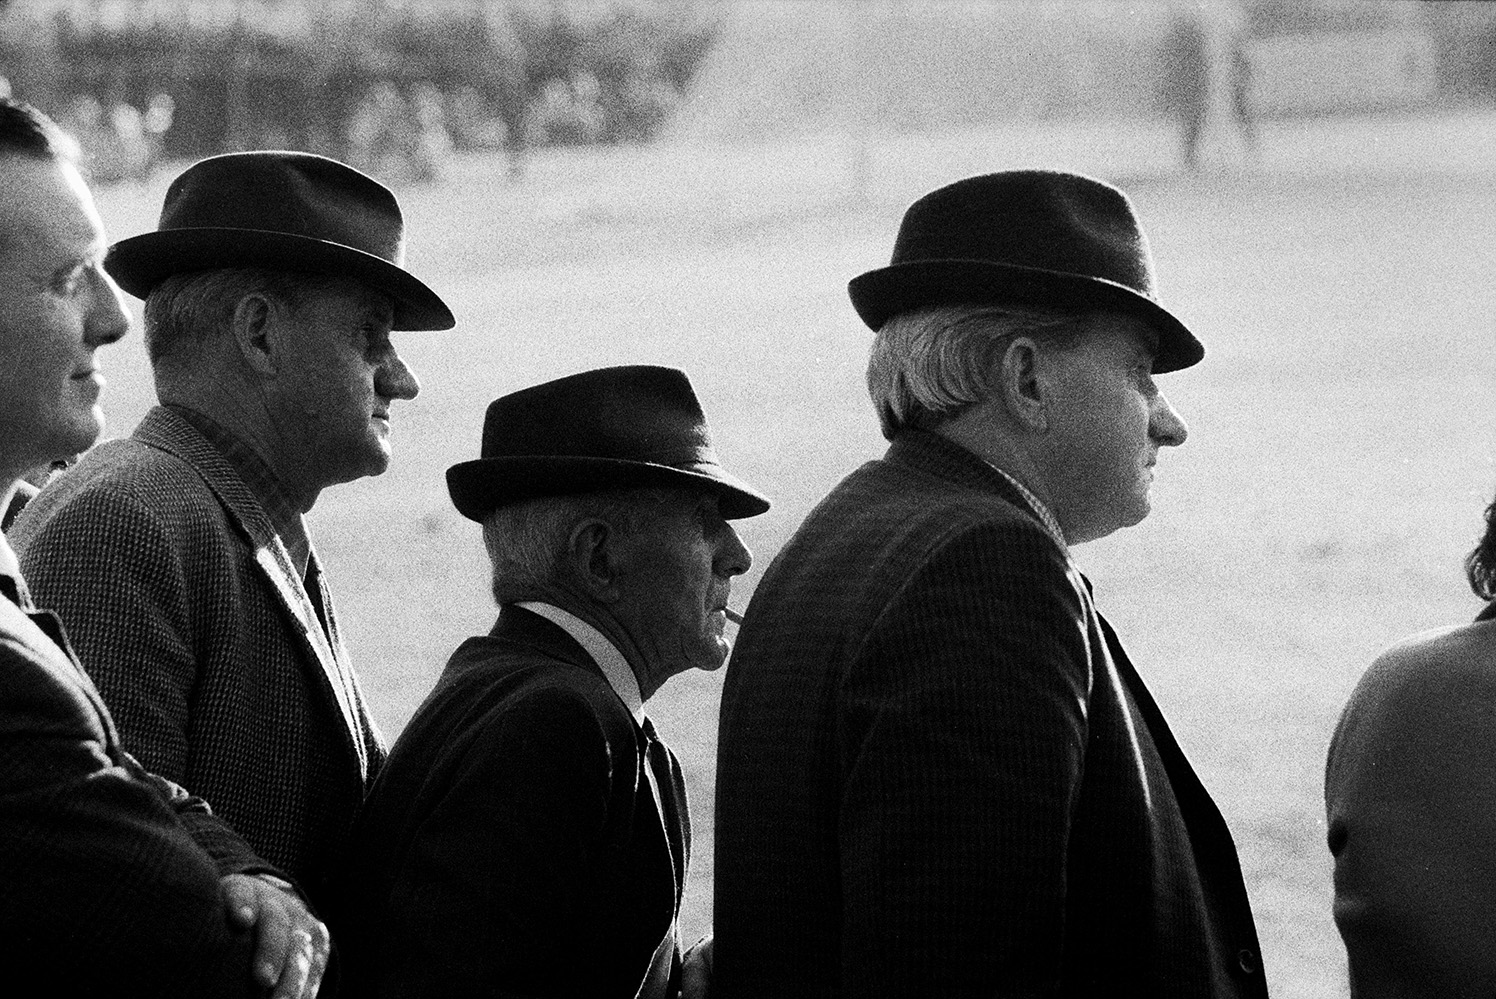 Men watching a football match between Bideford FC and Wadebridge FC, possibly held at Bideford. Three of them are wearing hats. The match was a cup final.